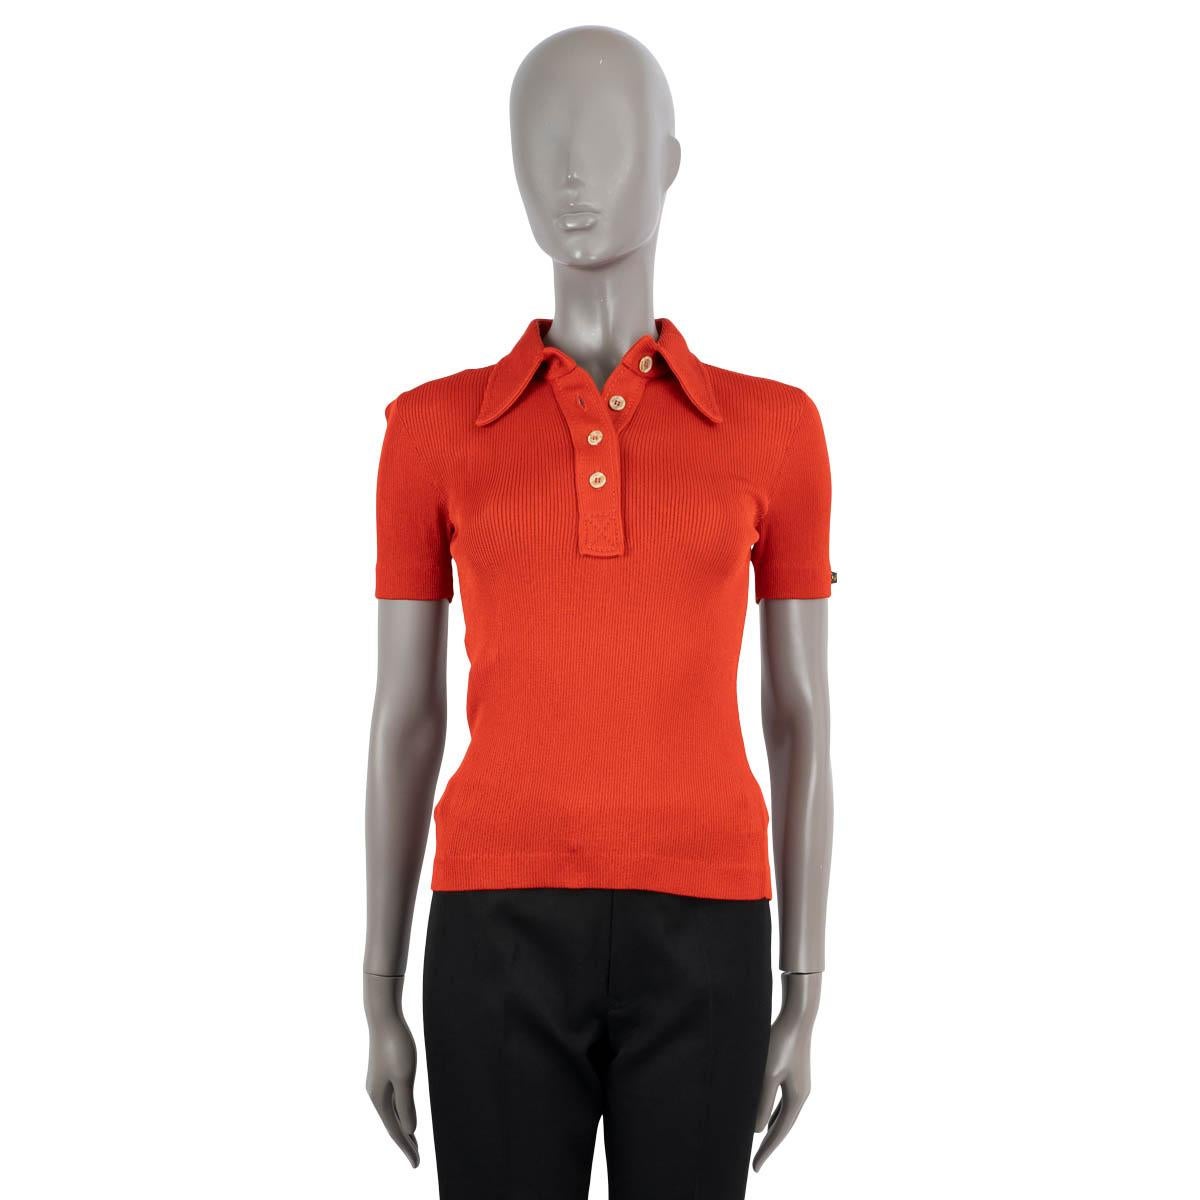 100% authentic Gucci rib-knit polo in rust viscose (82%) and polyamide (18%). Features four buttons on the front. Has been worn and is in excellent condition.

2021 Resort

Measurements
Tag Size	XS
Size	XS
Shoulder Width	34cm (13.3in)
Bust From	78cm